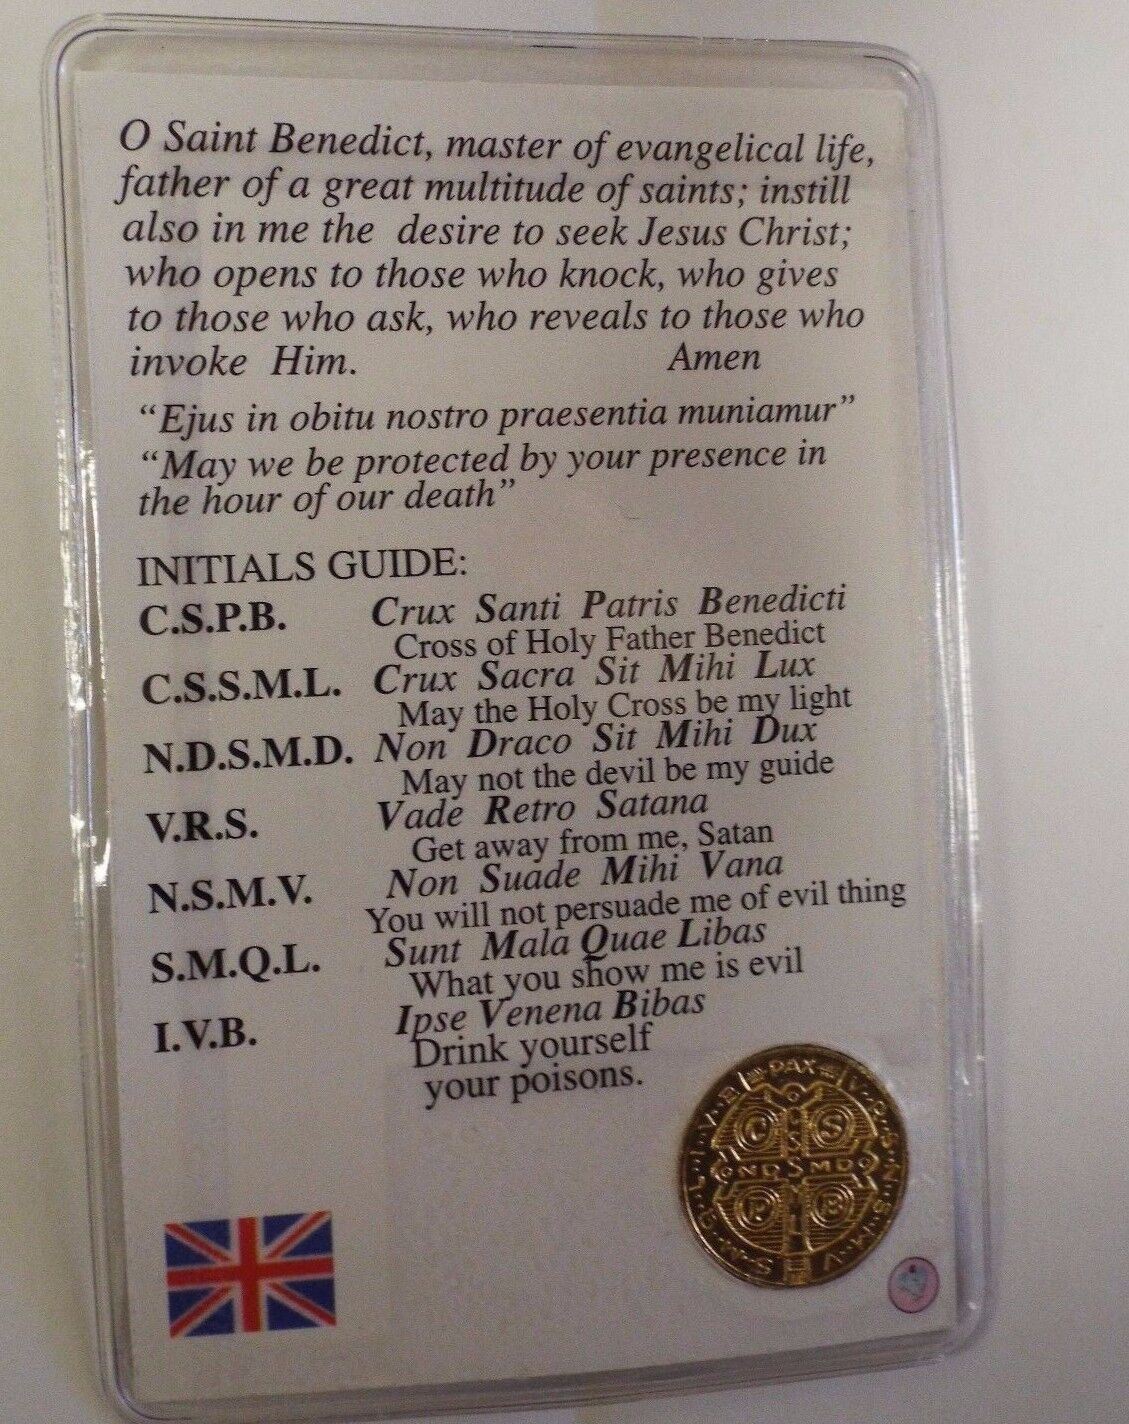 Saint Benedict Laminated Prayer Card with Gold Medal,Image 2, From Italy, New - Bob and Penny Lord